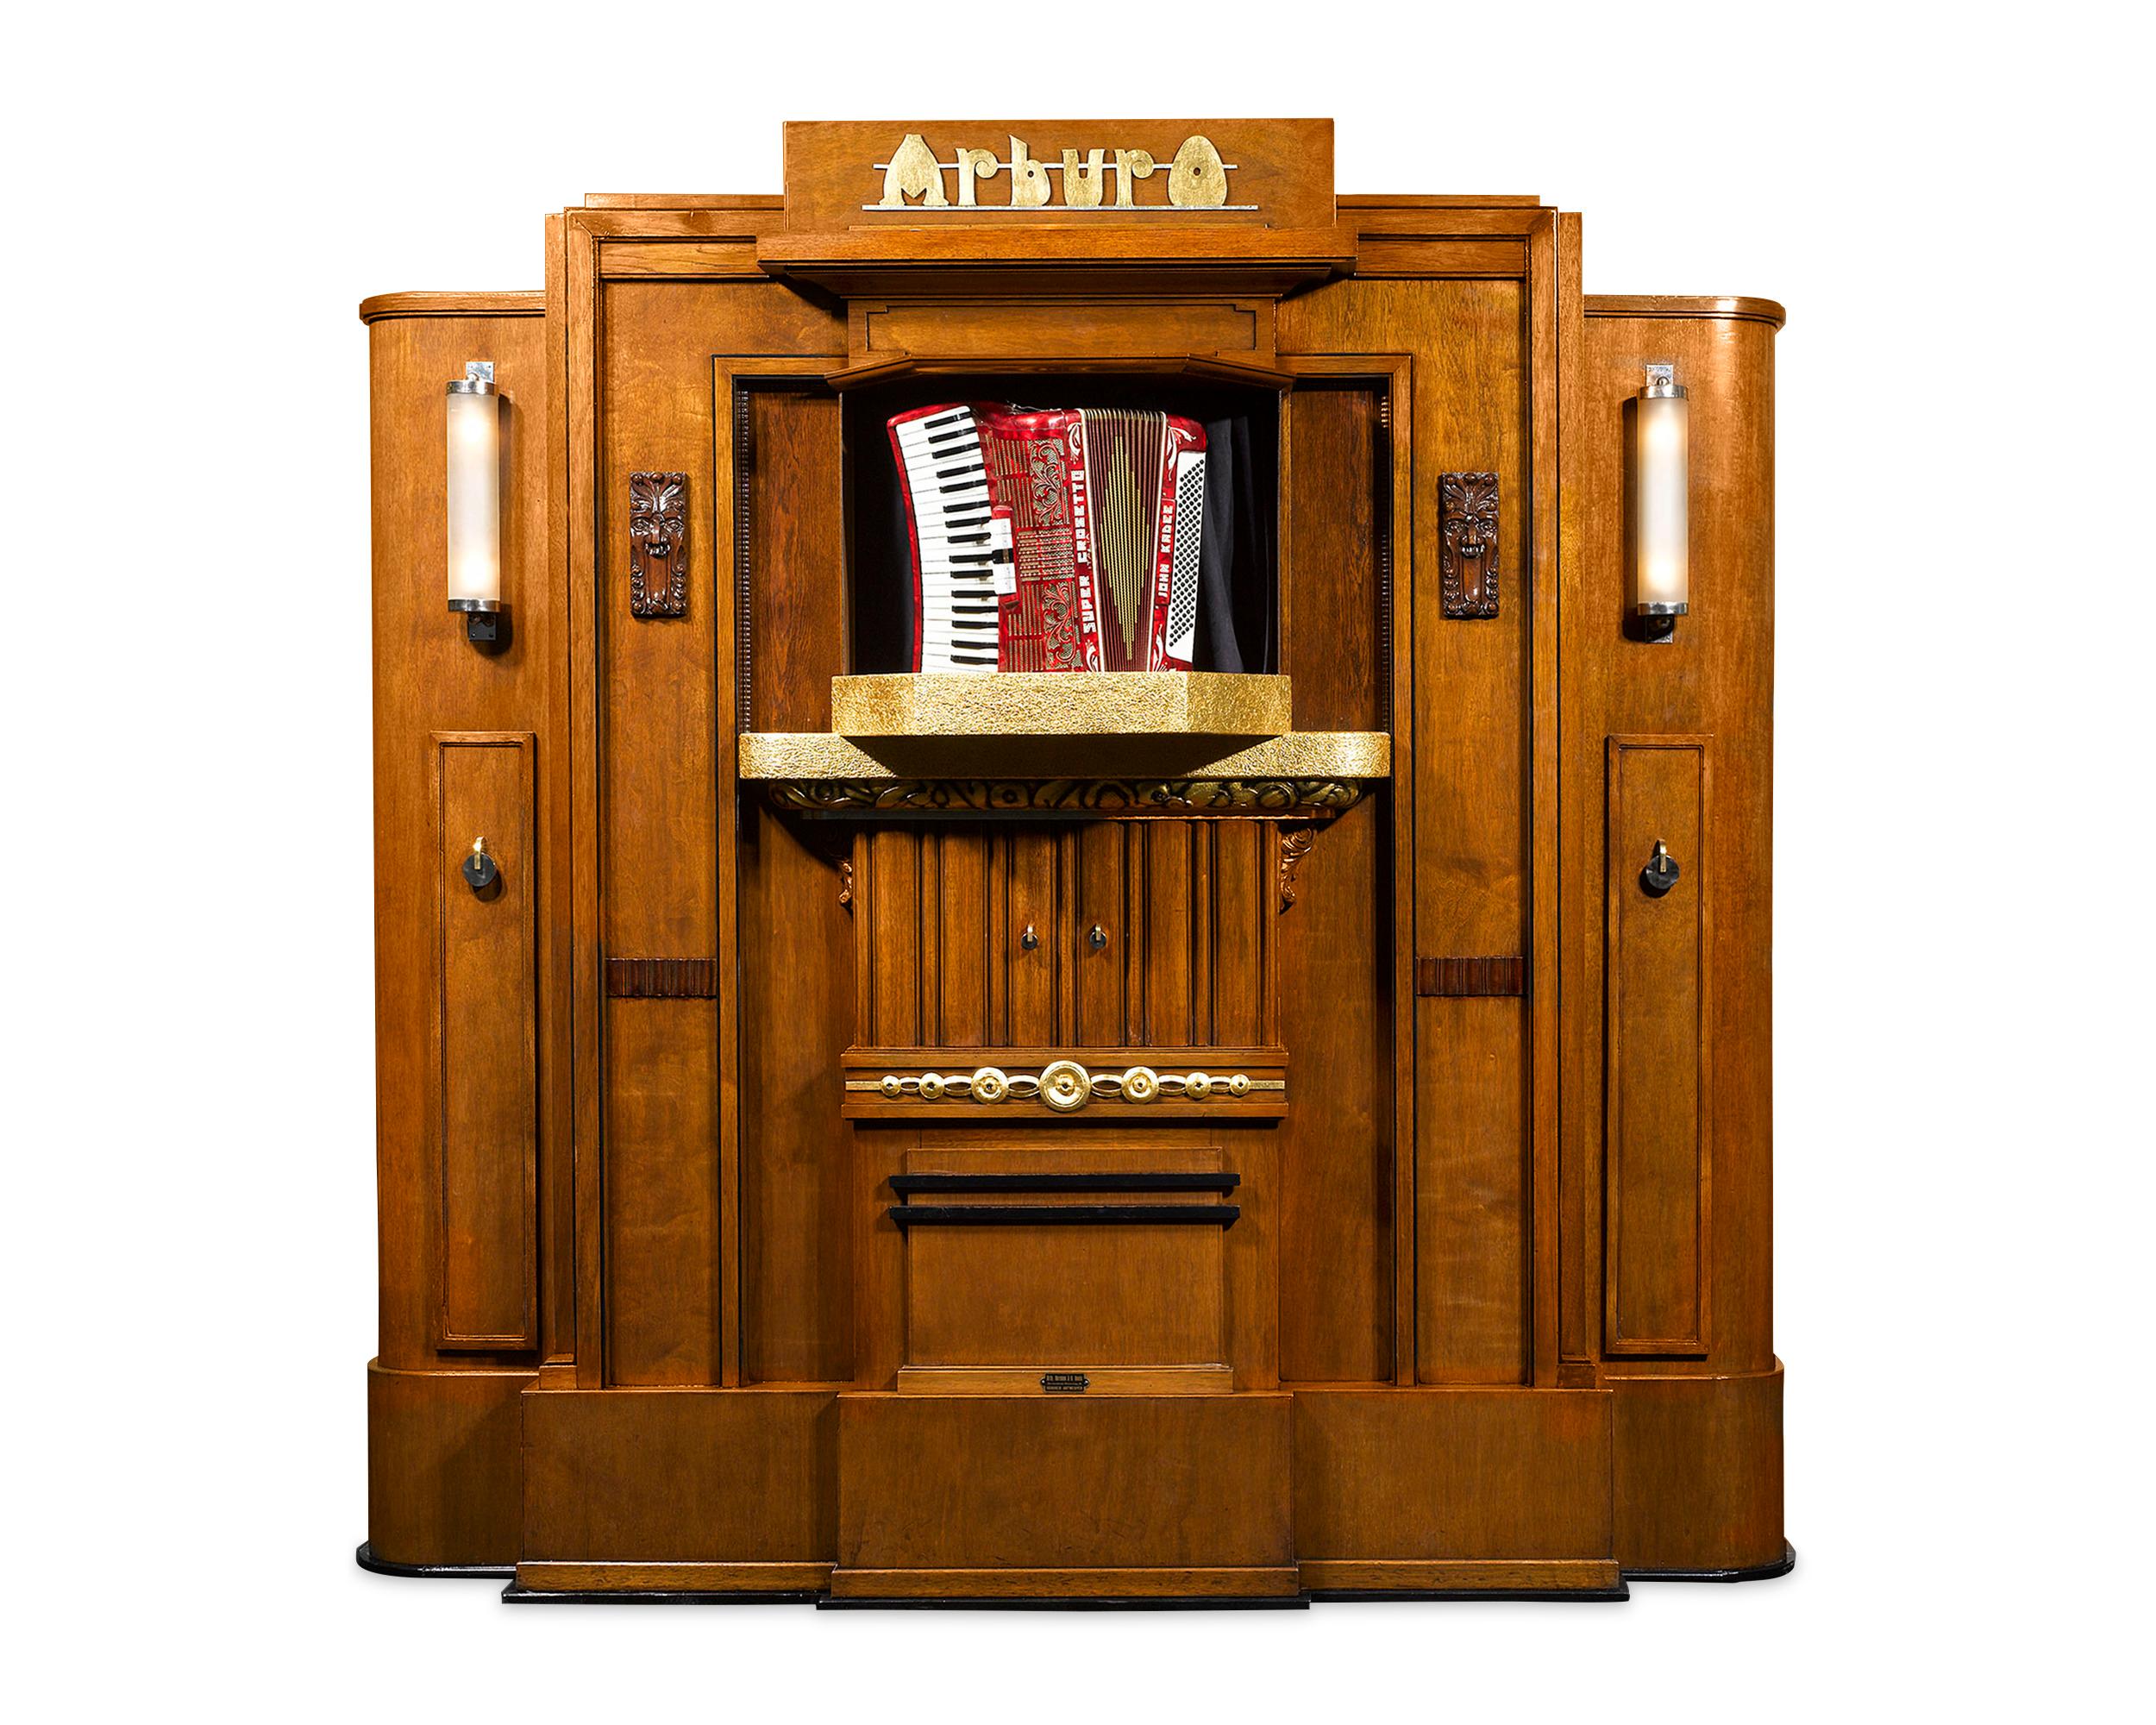 Once a fixture in bustling dance halls, cafés and fairgrounds throughout Belgium and the Netherlands in early to mid-20th century, this incredibly rare, early Orchestrion organ is a masterpiece of automated music. Crafted by the Arburo firm run by